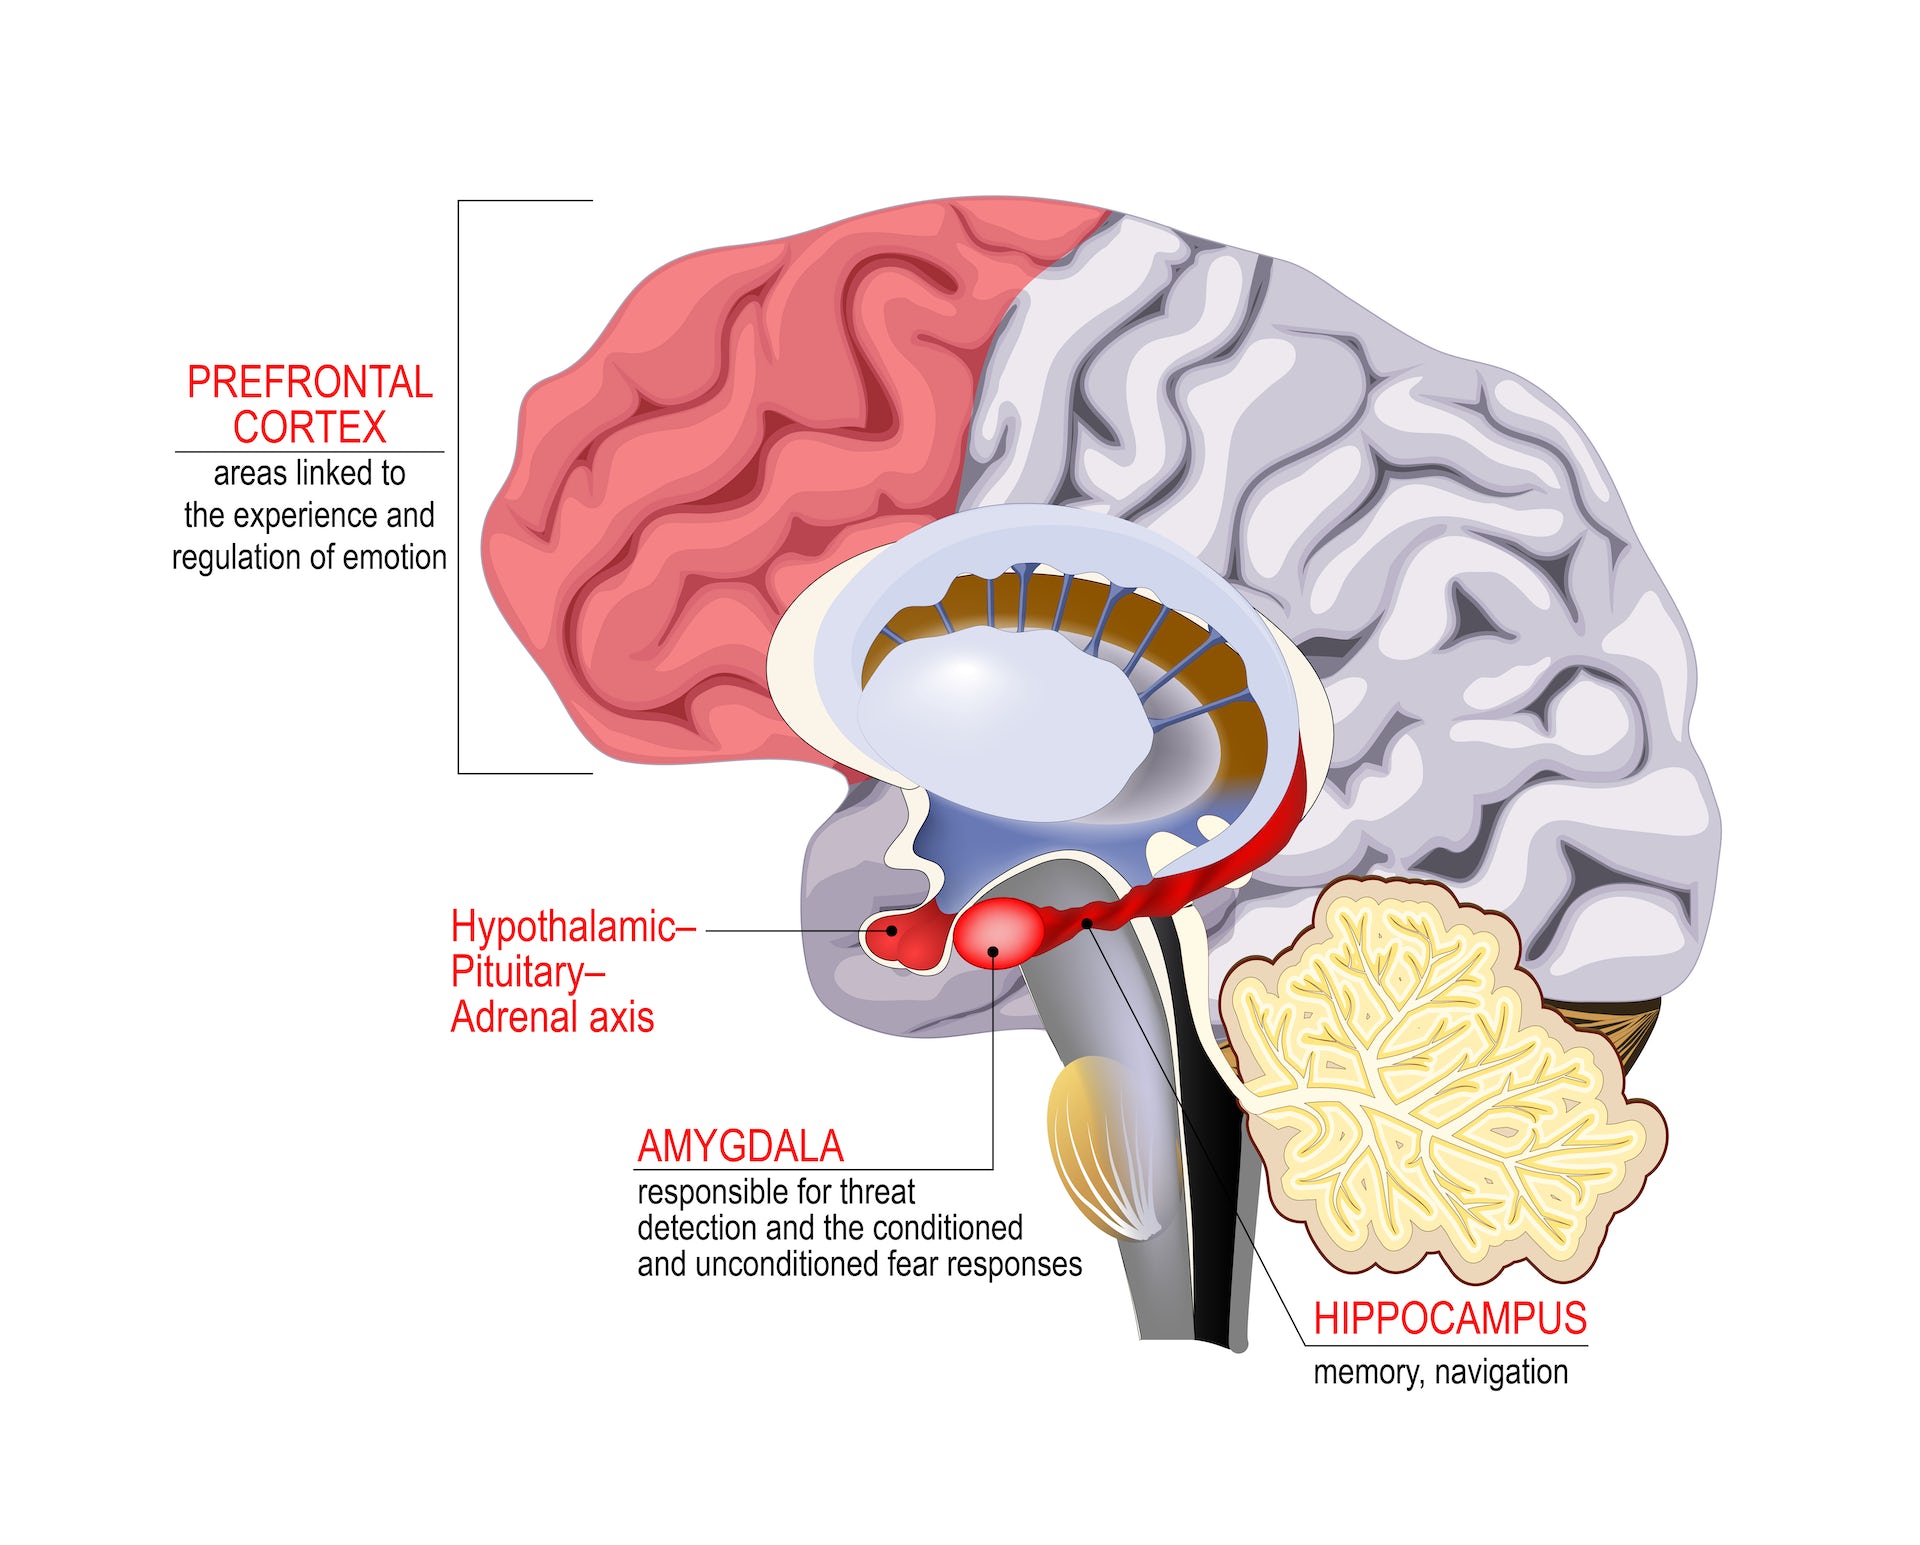 Illustration of a human brain highlighting various brain regions that are associated with stress.